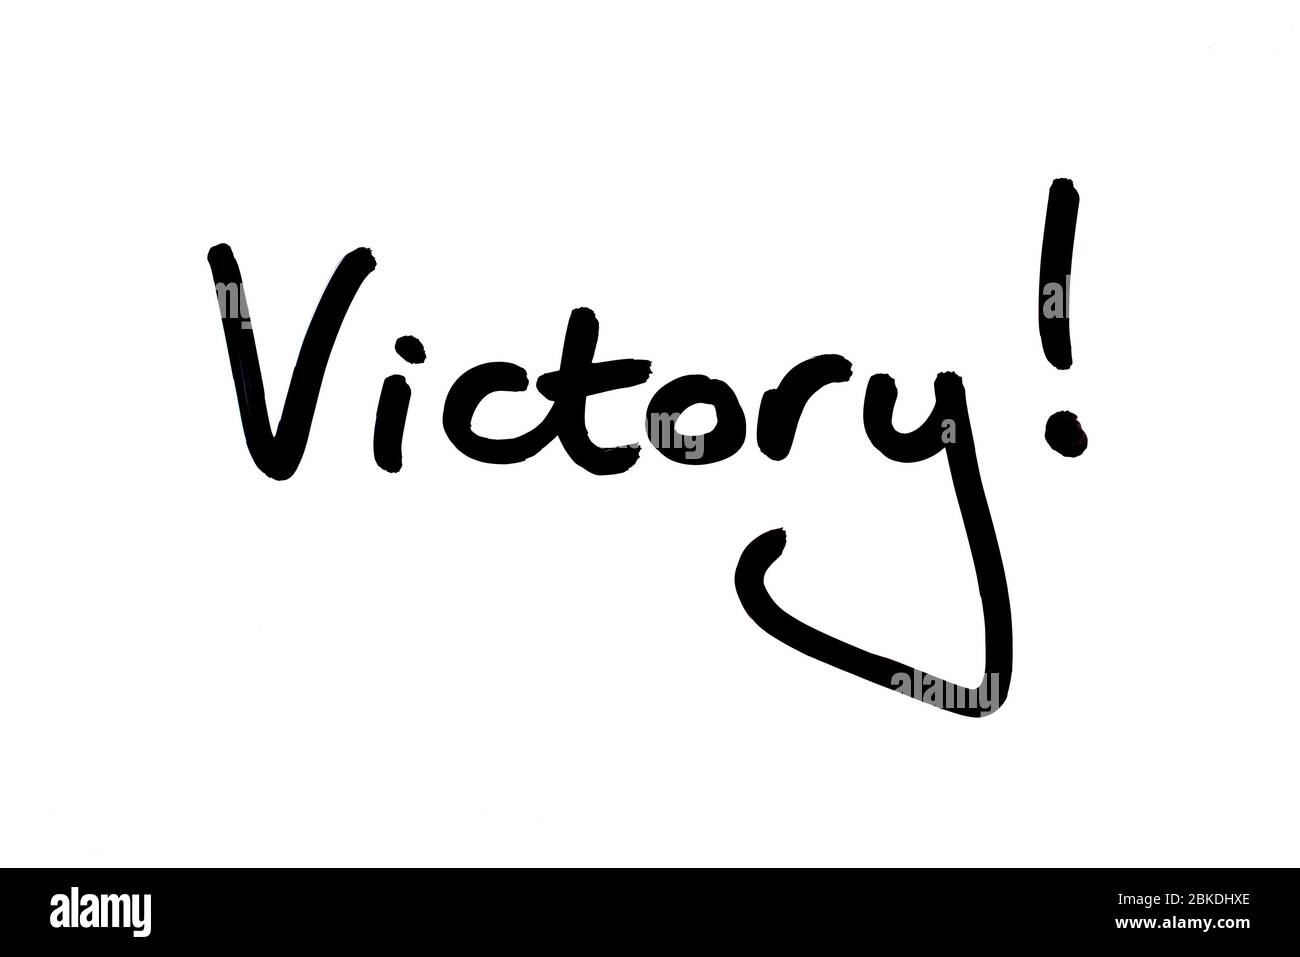 Victory! handwritten on a white background. Stock Photo